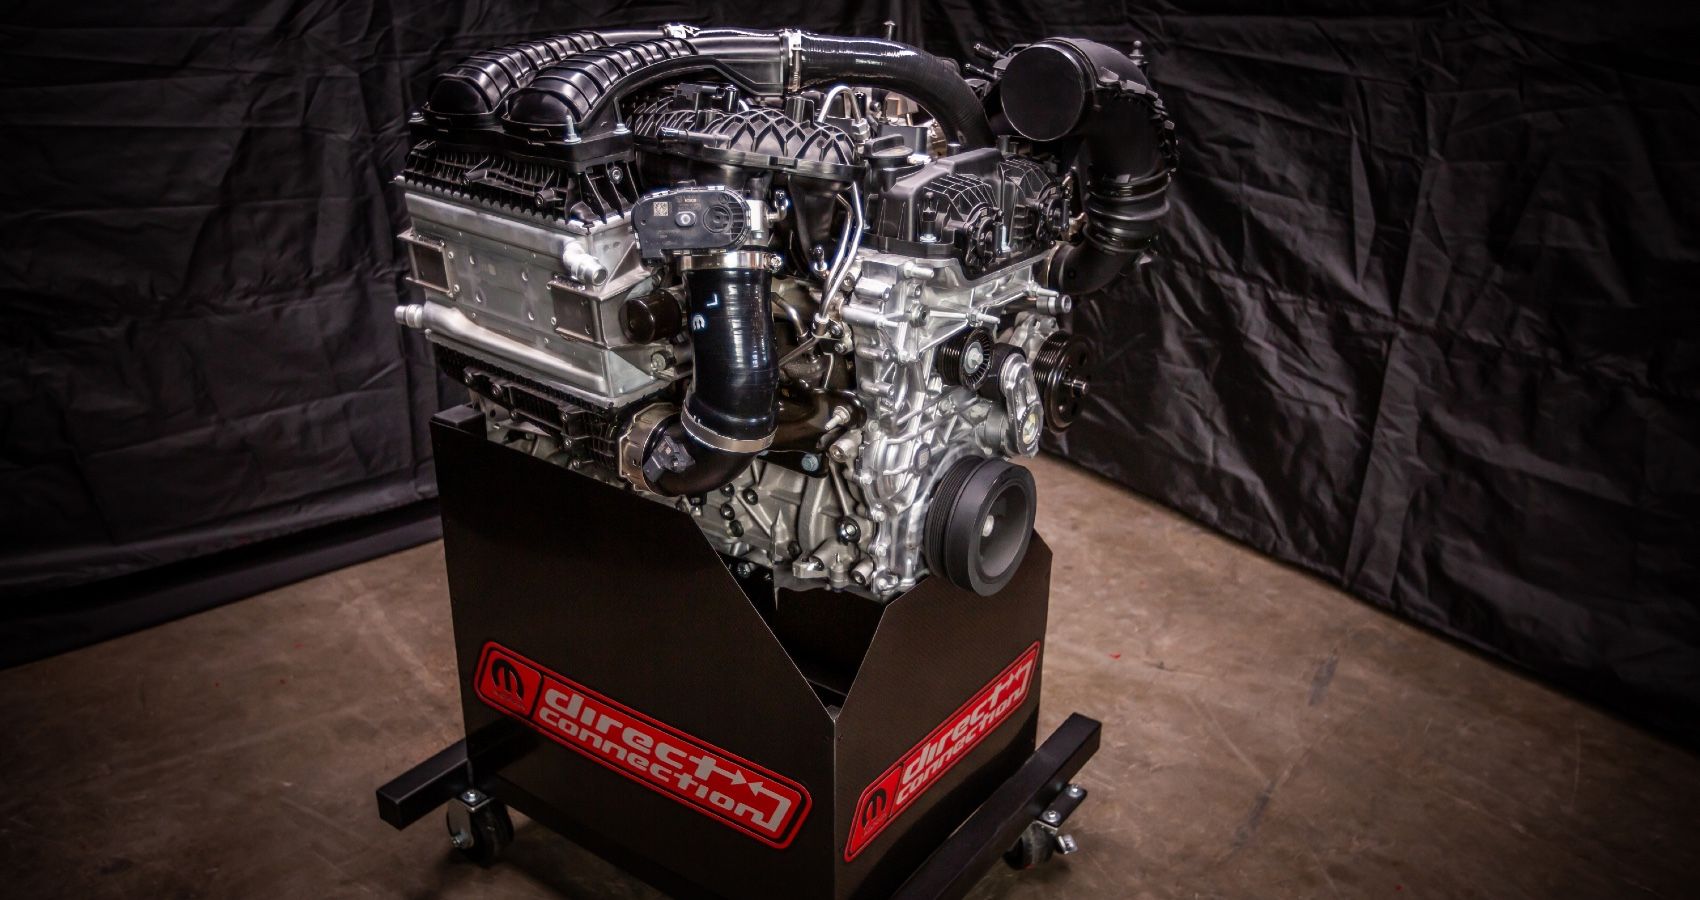 Dodge's new Hellephant and HurriCrate engines from 2022